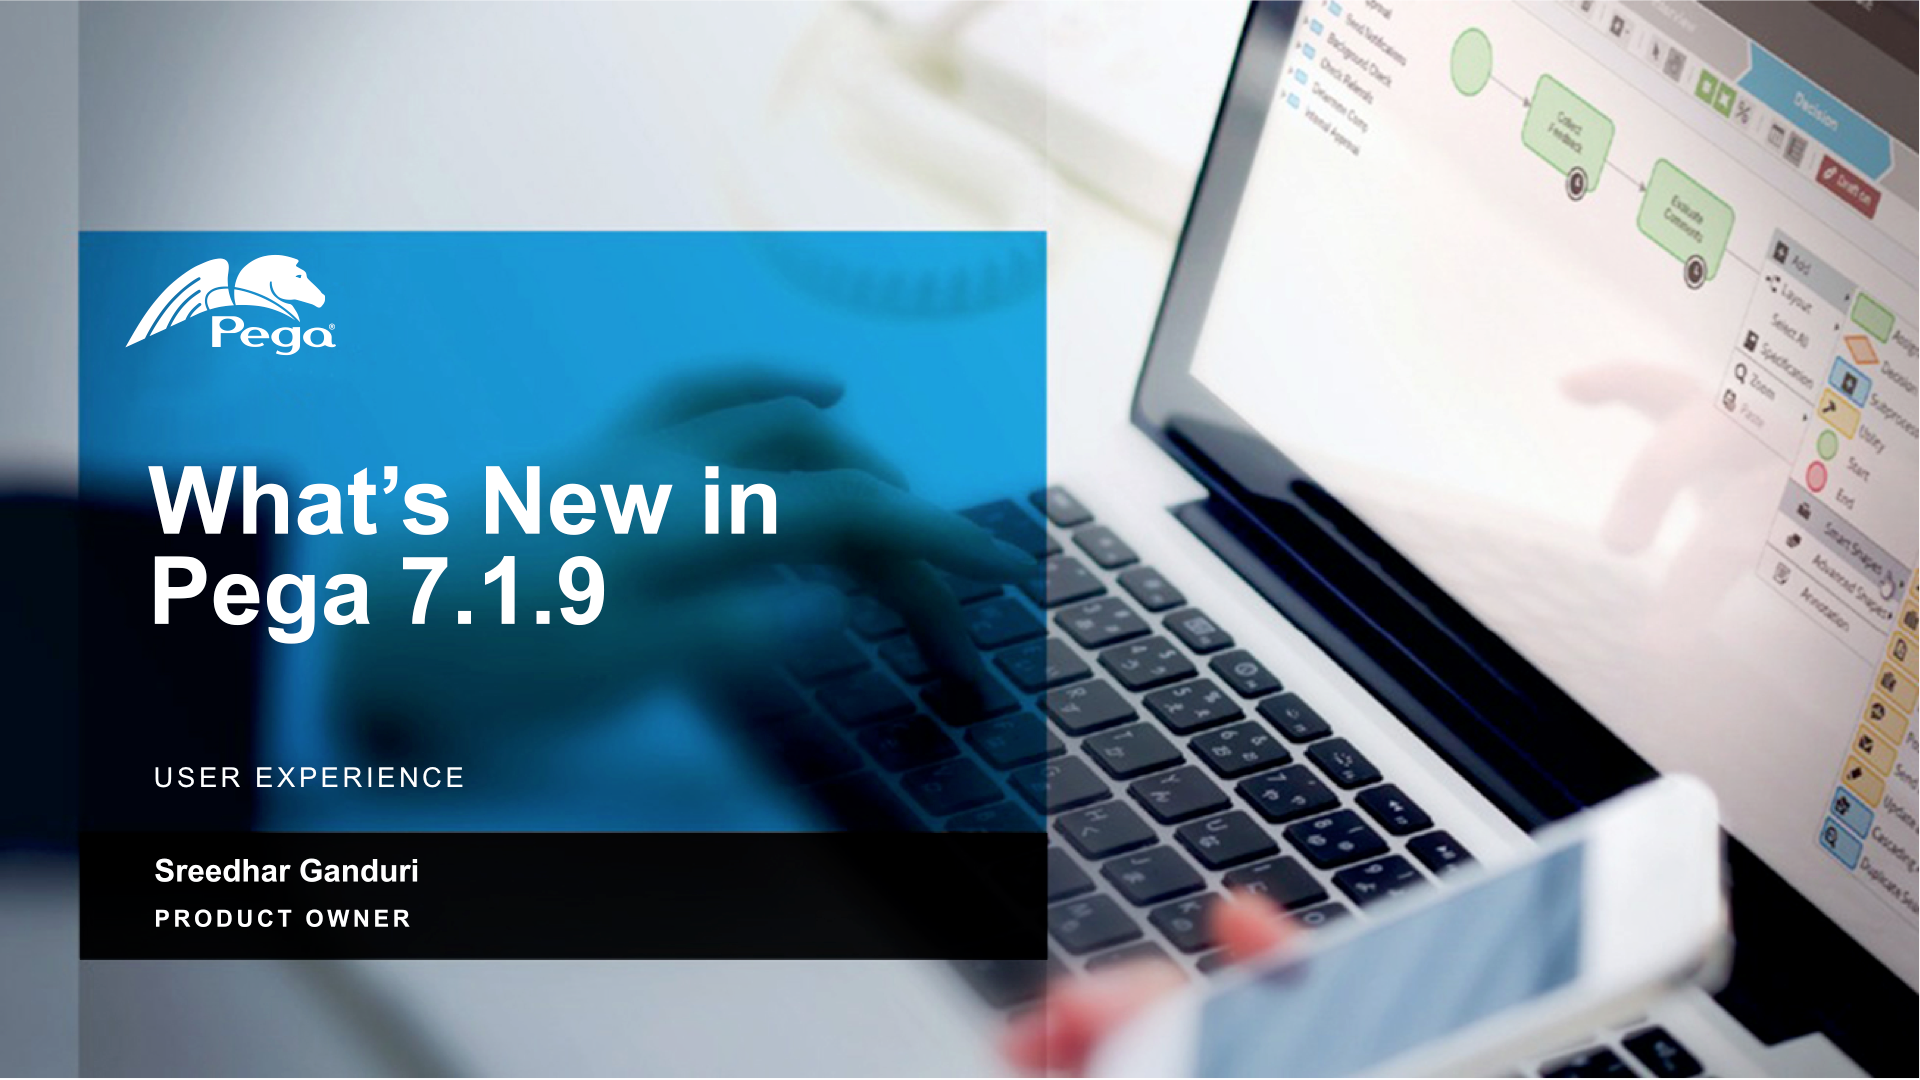 Pega 7.1.9 Update: What's New in User Experience